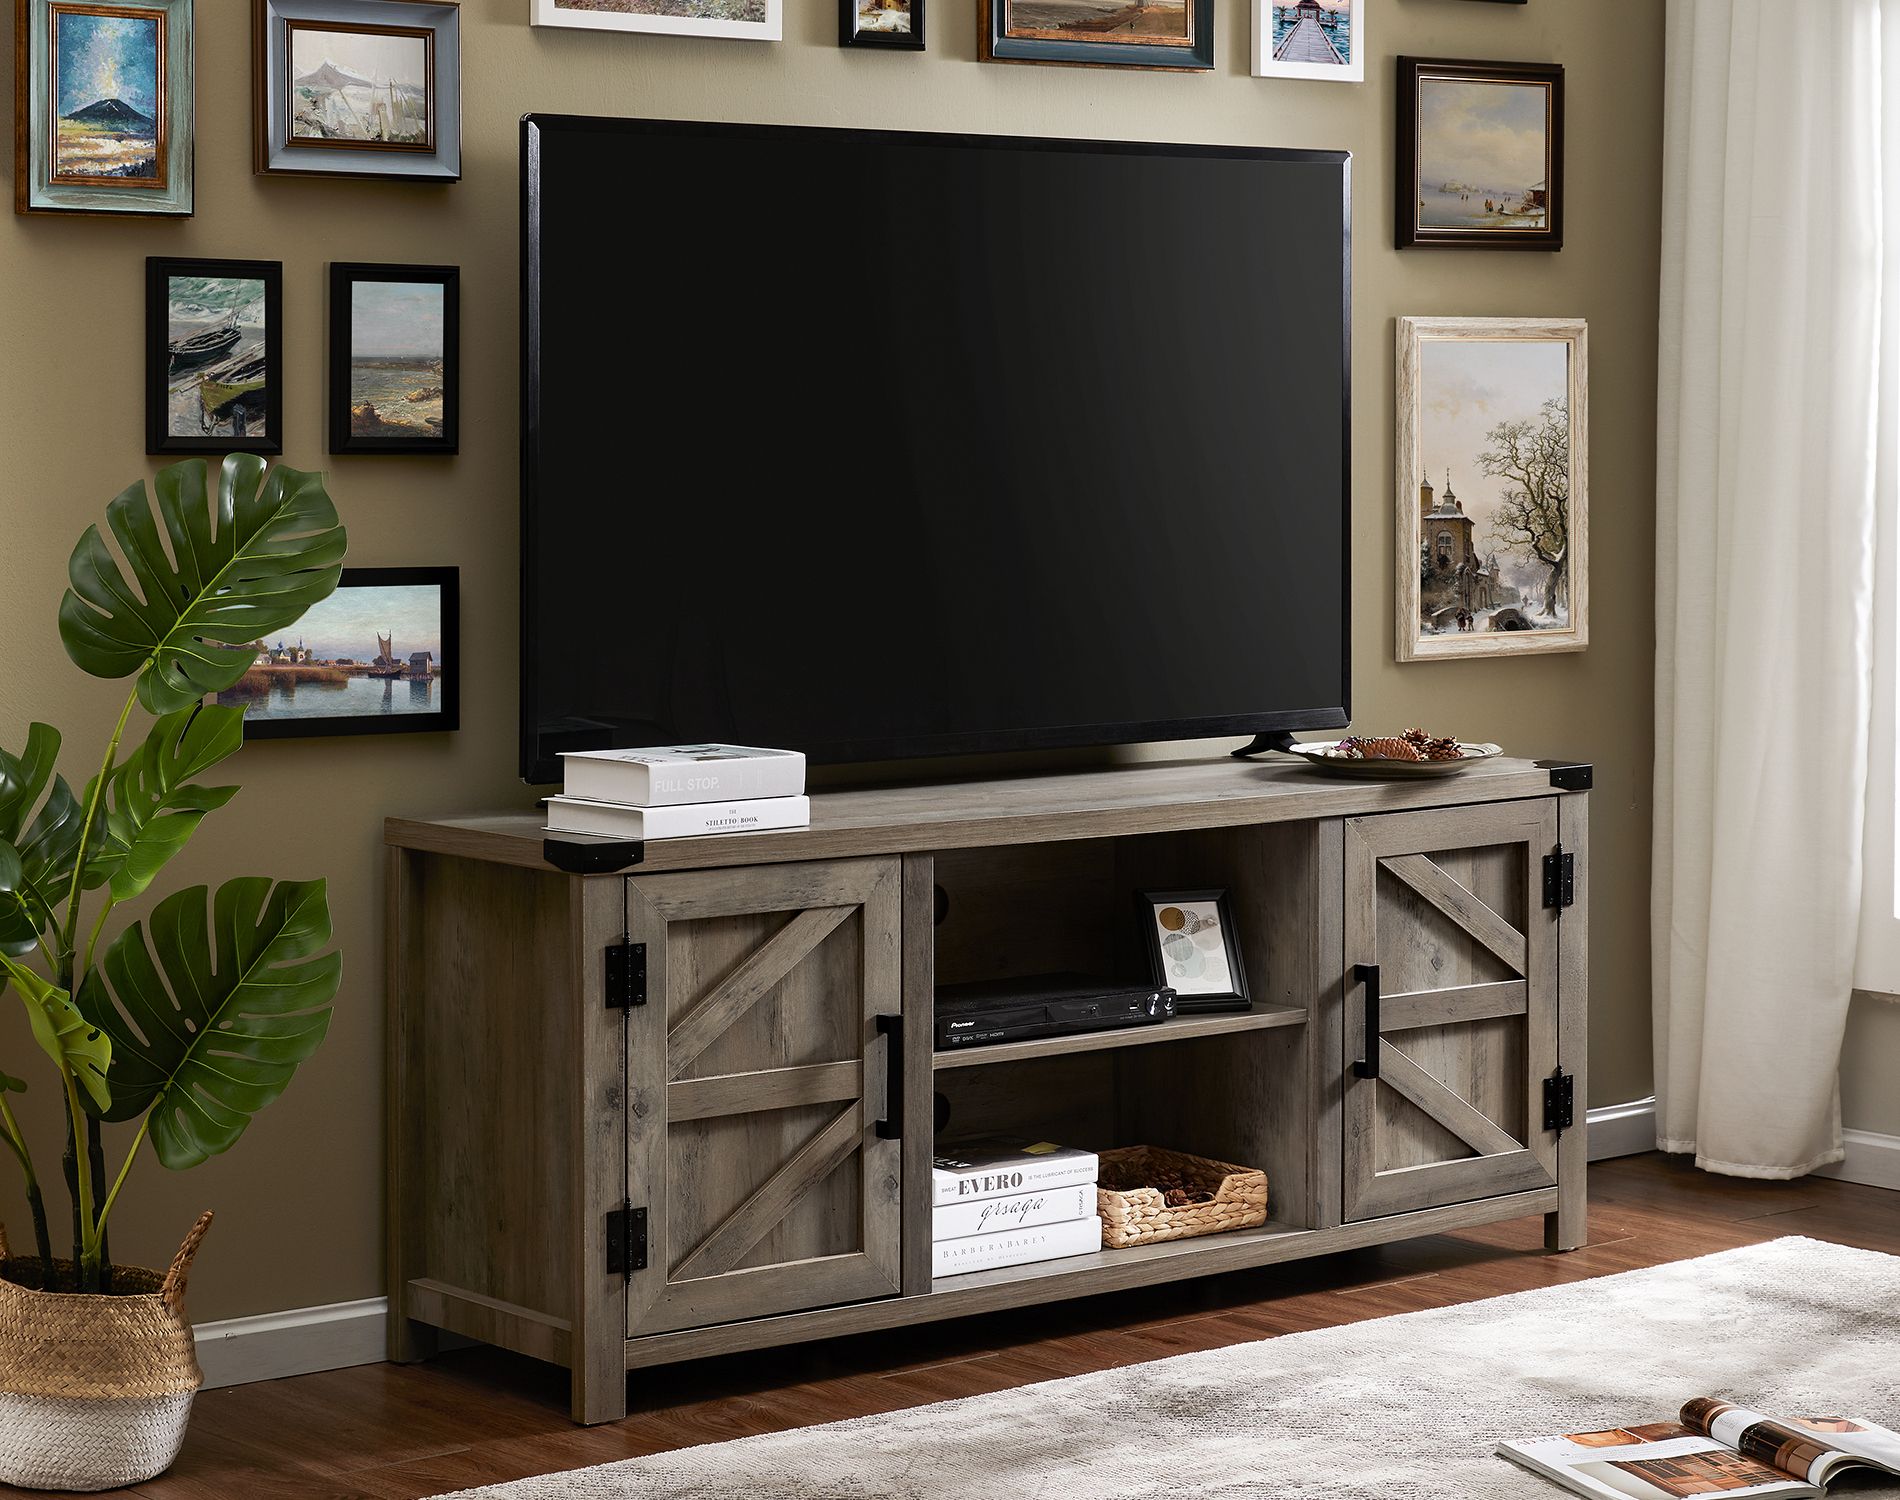 Fitueyes Farmhouse Barn Door Wood Tv Stands For 70 Inch For Fitueyes Rolling Tv Cart For Living Room (View 14 of 15)